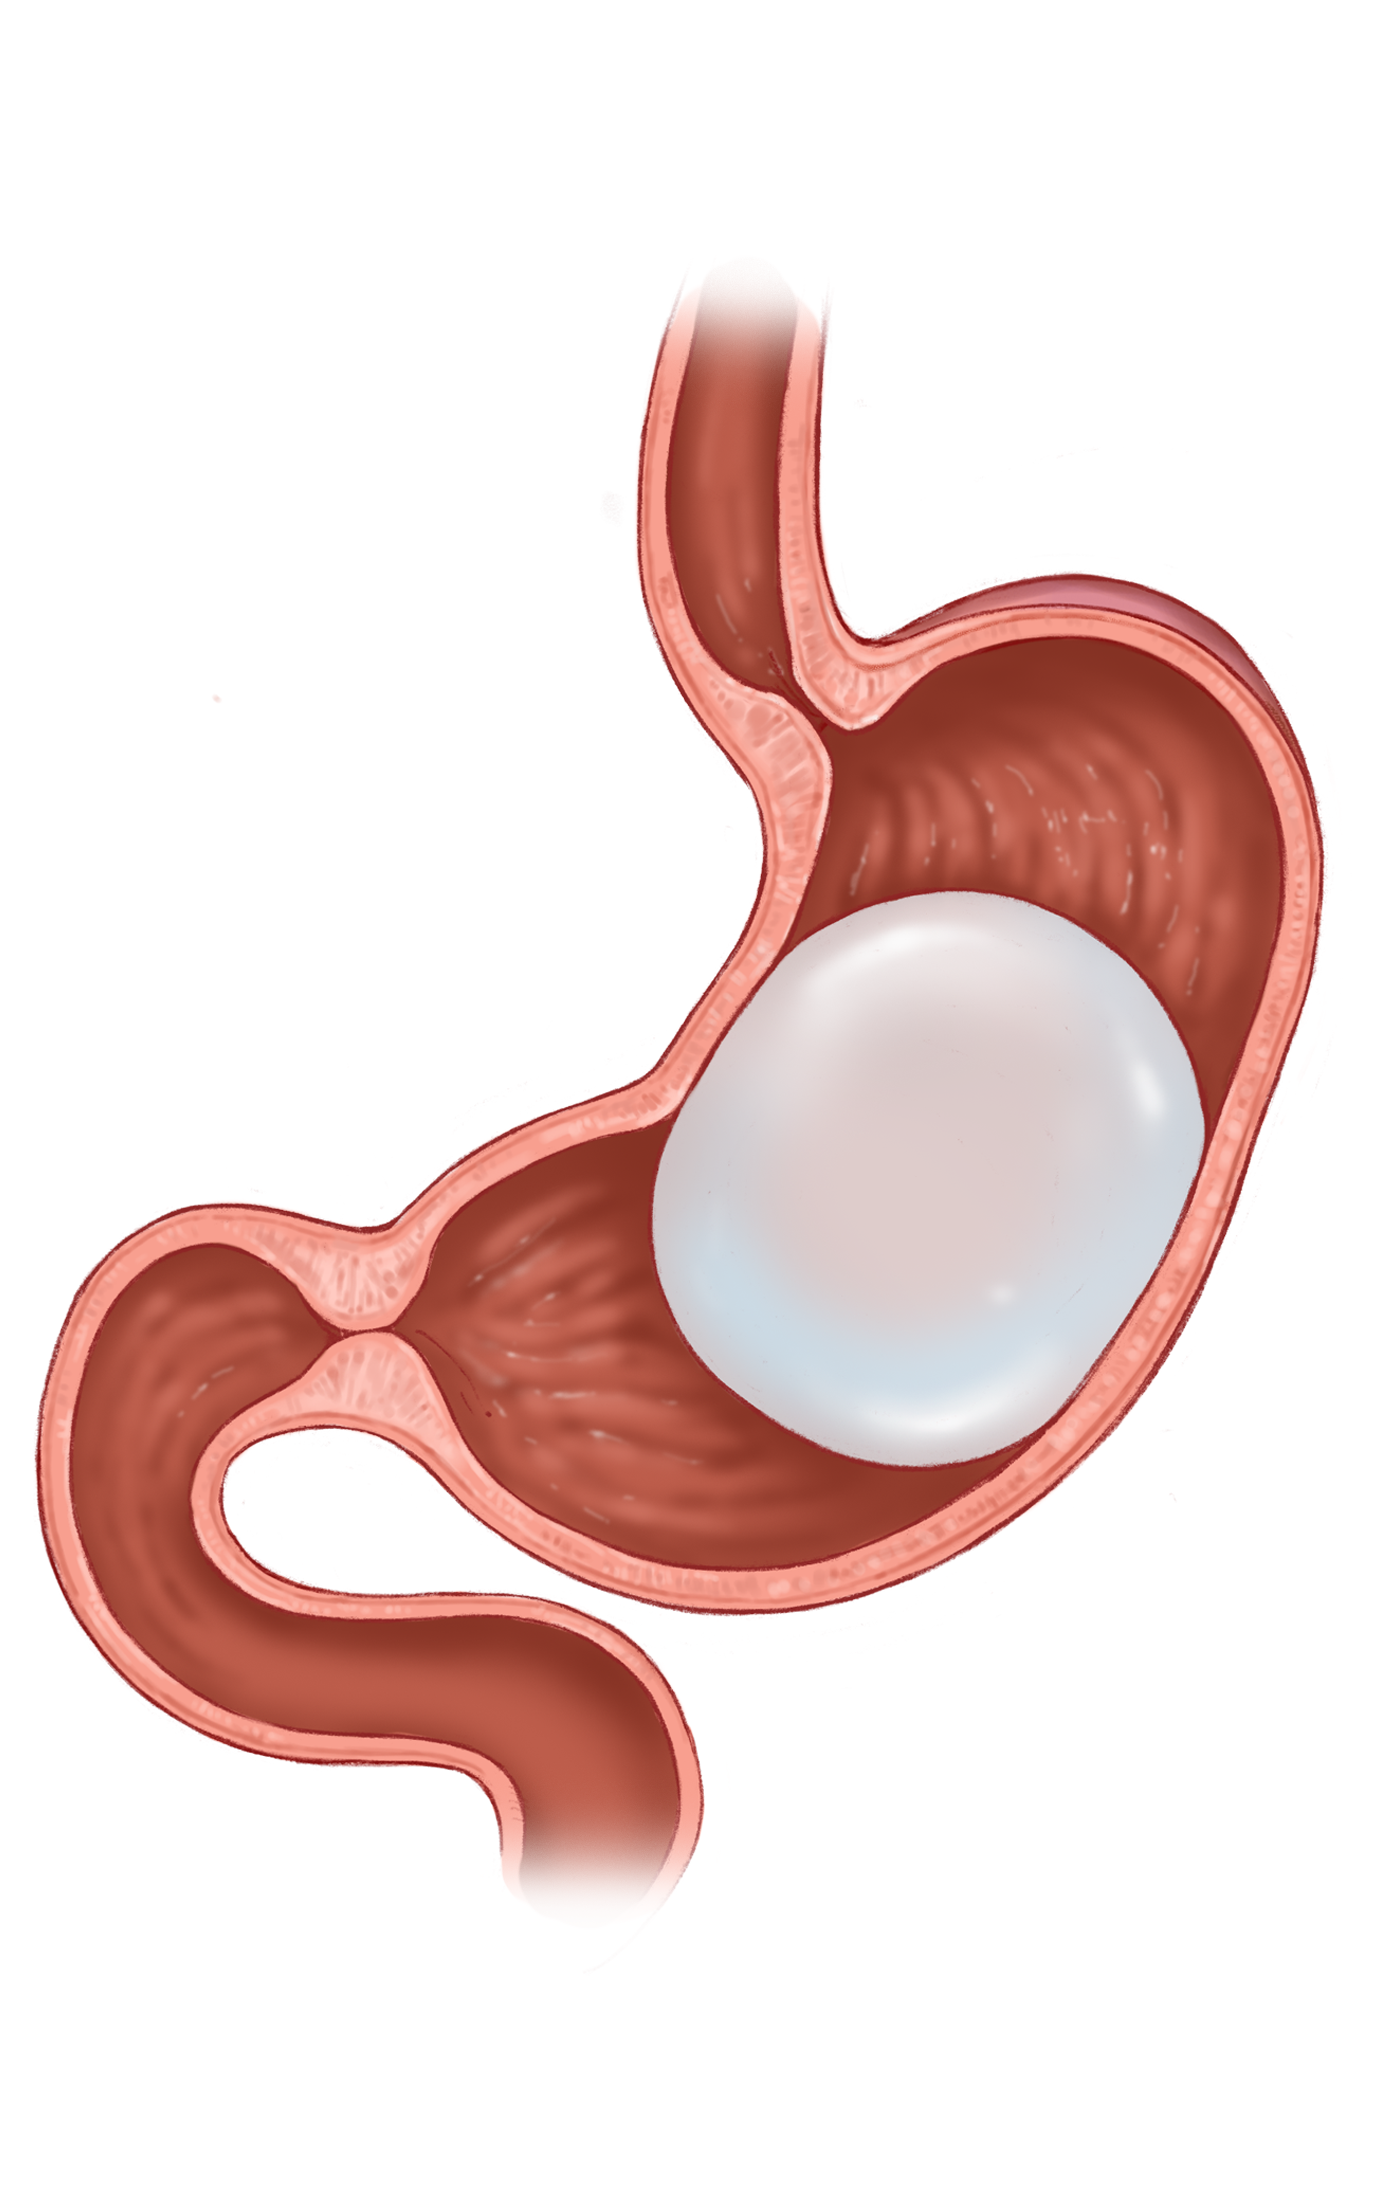 Intragastric Balloon Therapy Normal Post Operative Appearance